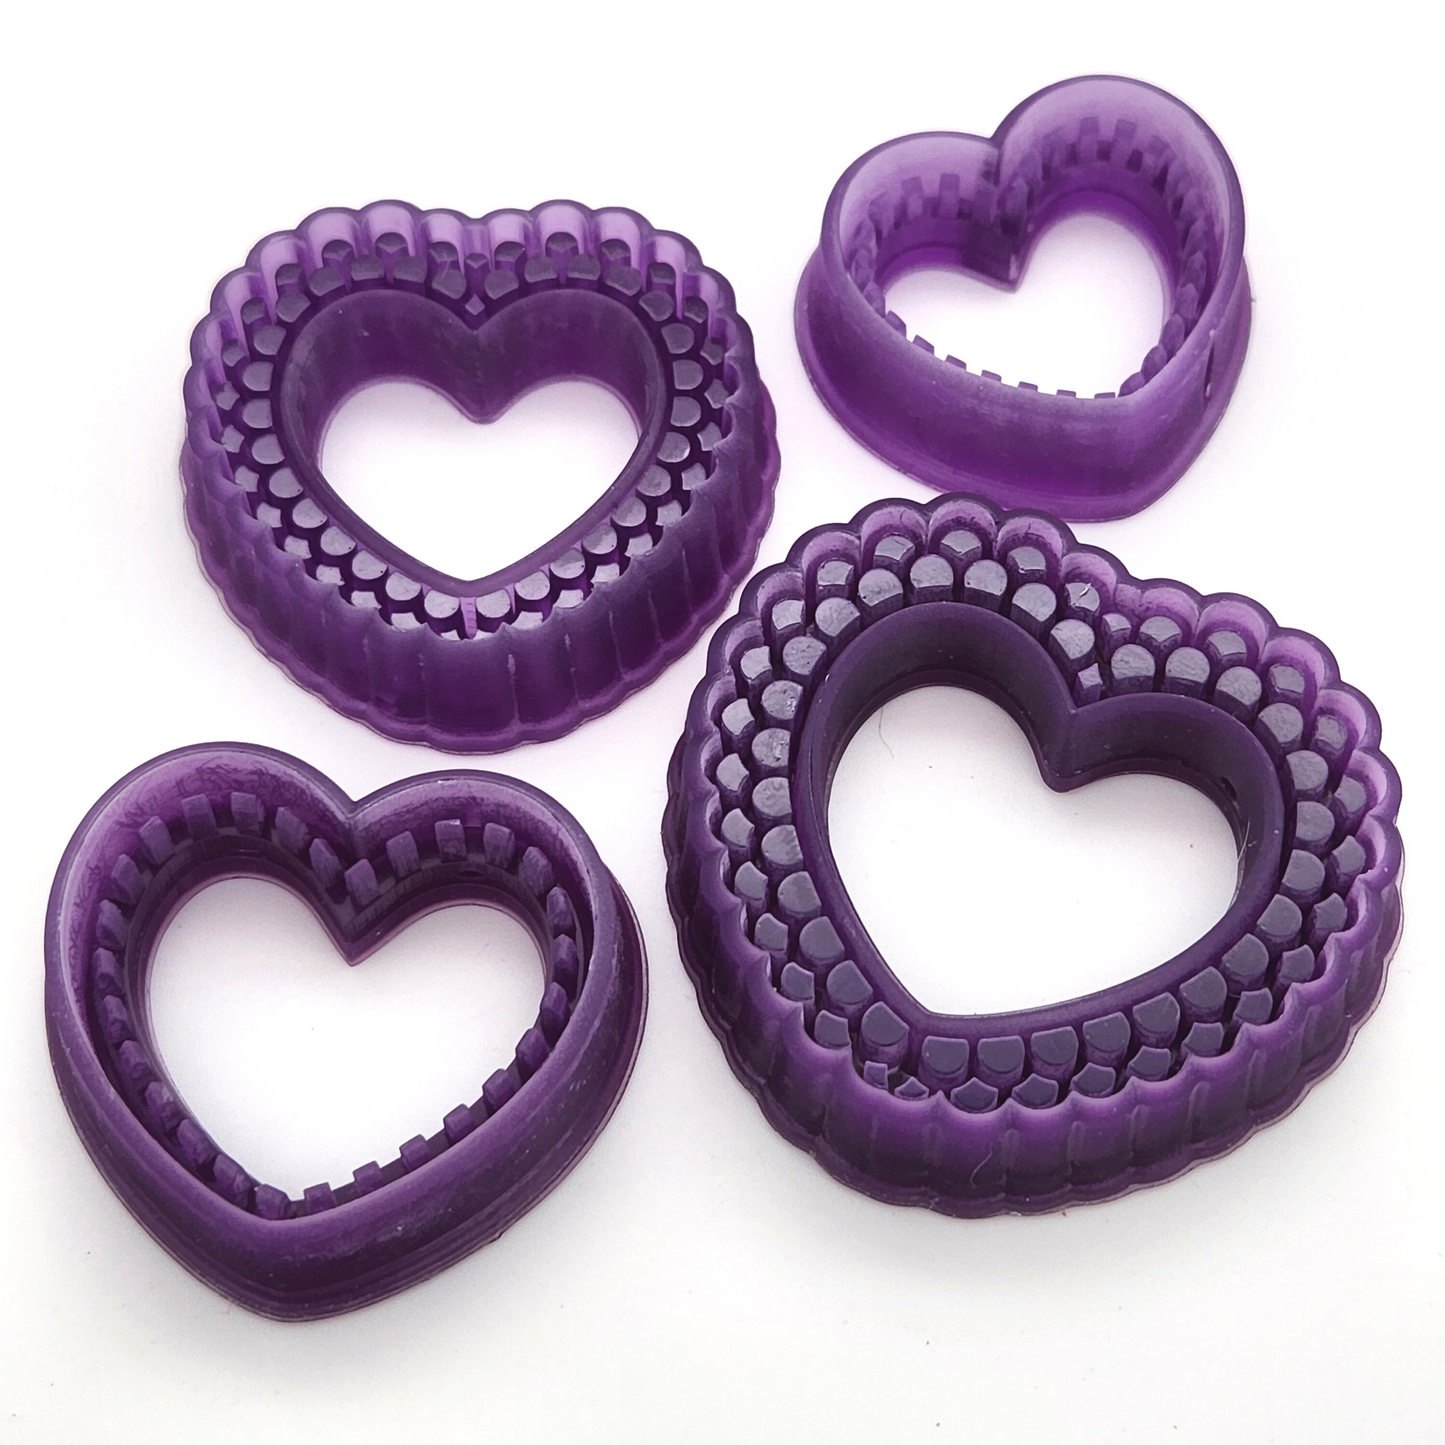 3D printed resin sharp edge Stitched and Doily Heart polymer clay cutter set details